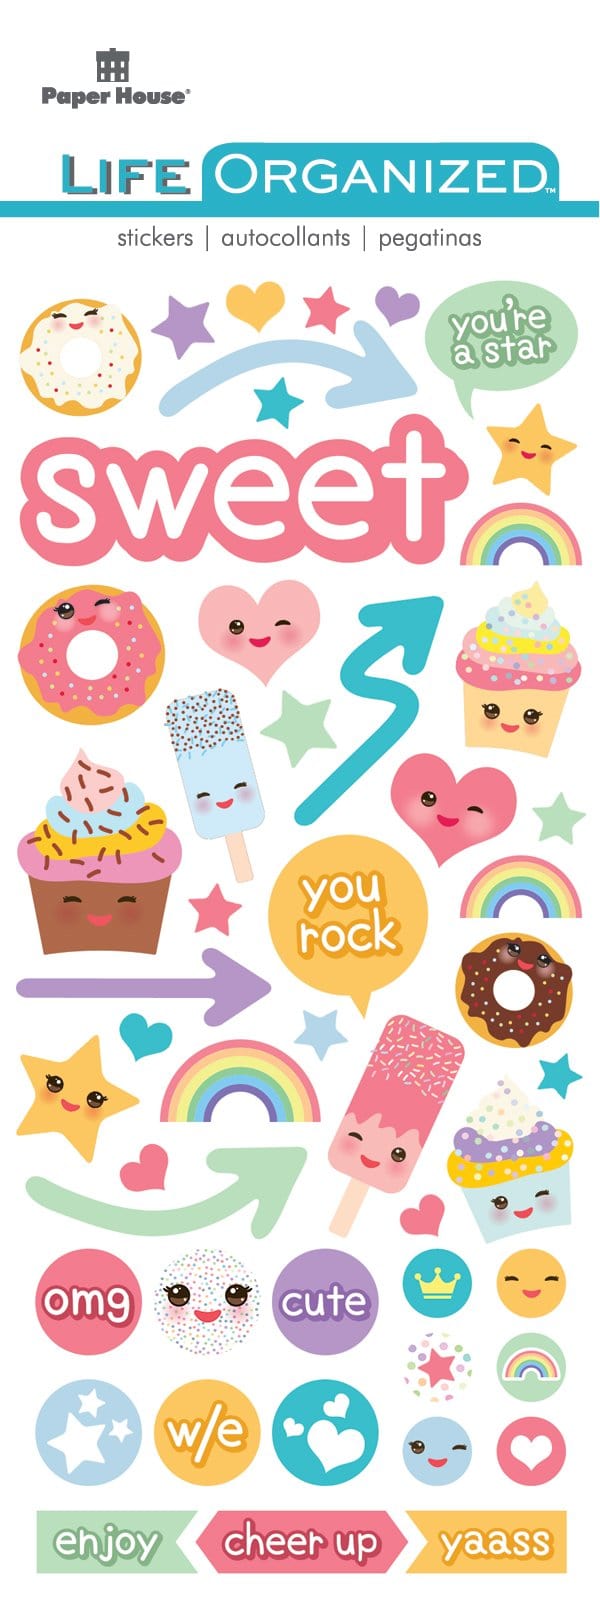 puffy stickers featuring rainbows, arrows, kawaii cupcakes, donuts and hearts, shown in package.